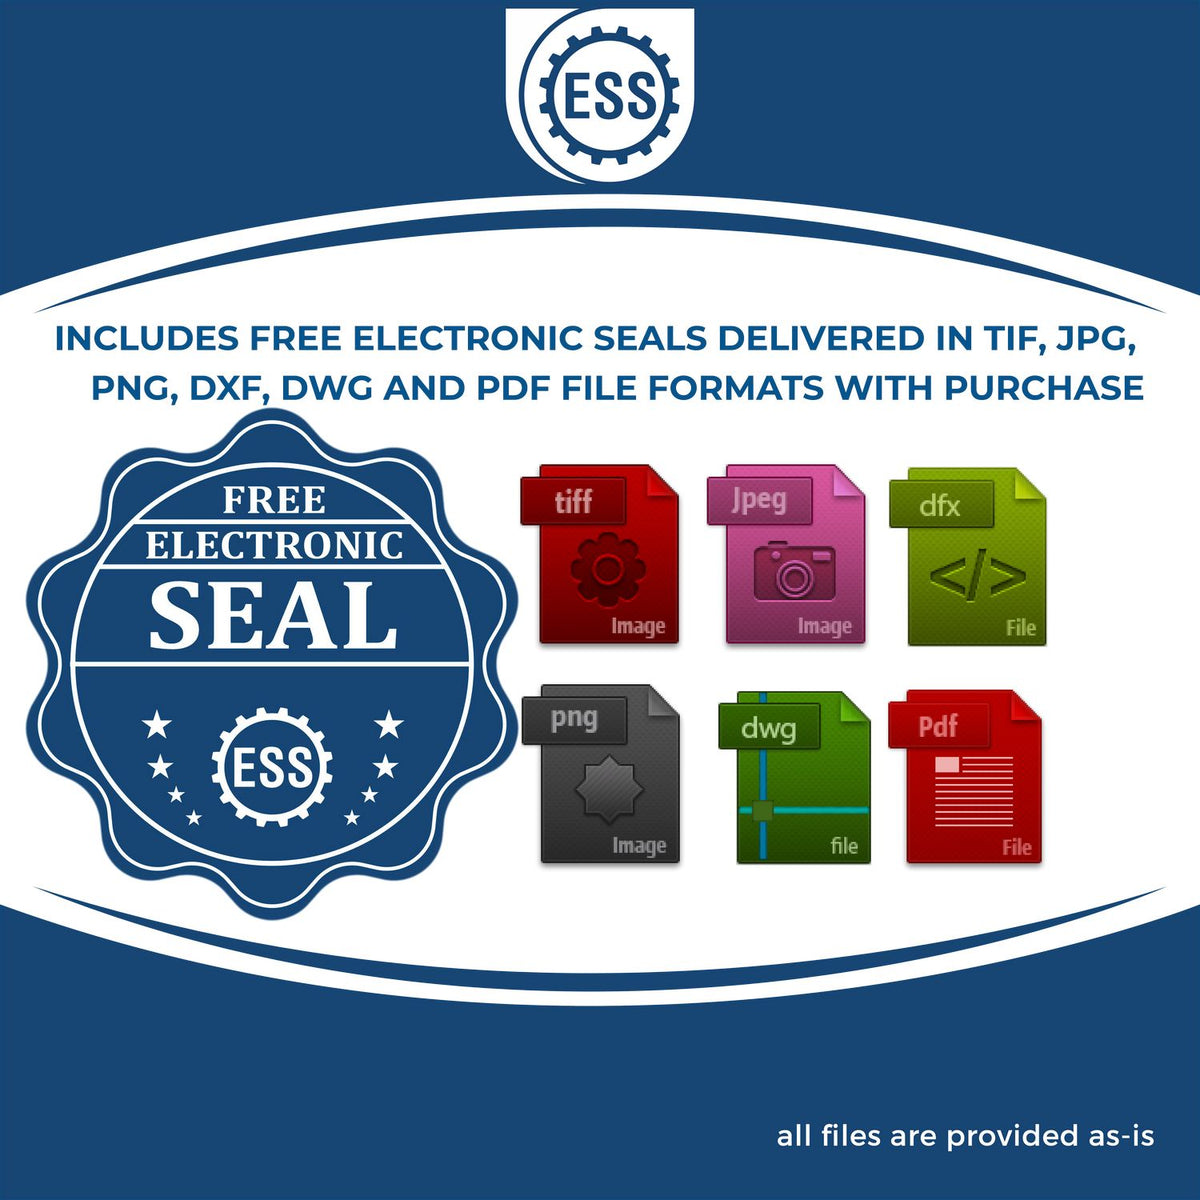 An infographic for the free electronic seal for the Gift Nebraska Engineer Seal illustrating the different file type icons such as DXF, DWG, TIF, JPG and PNG.